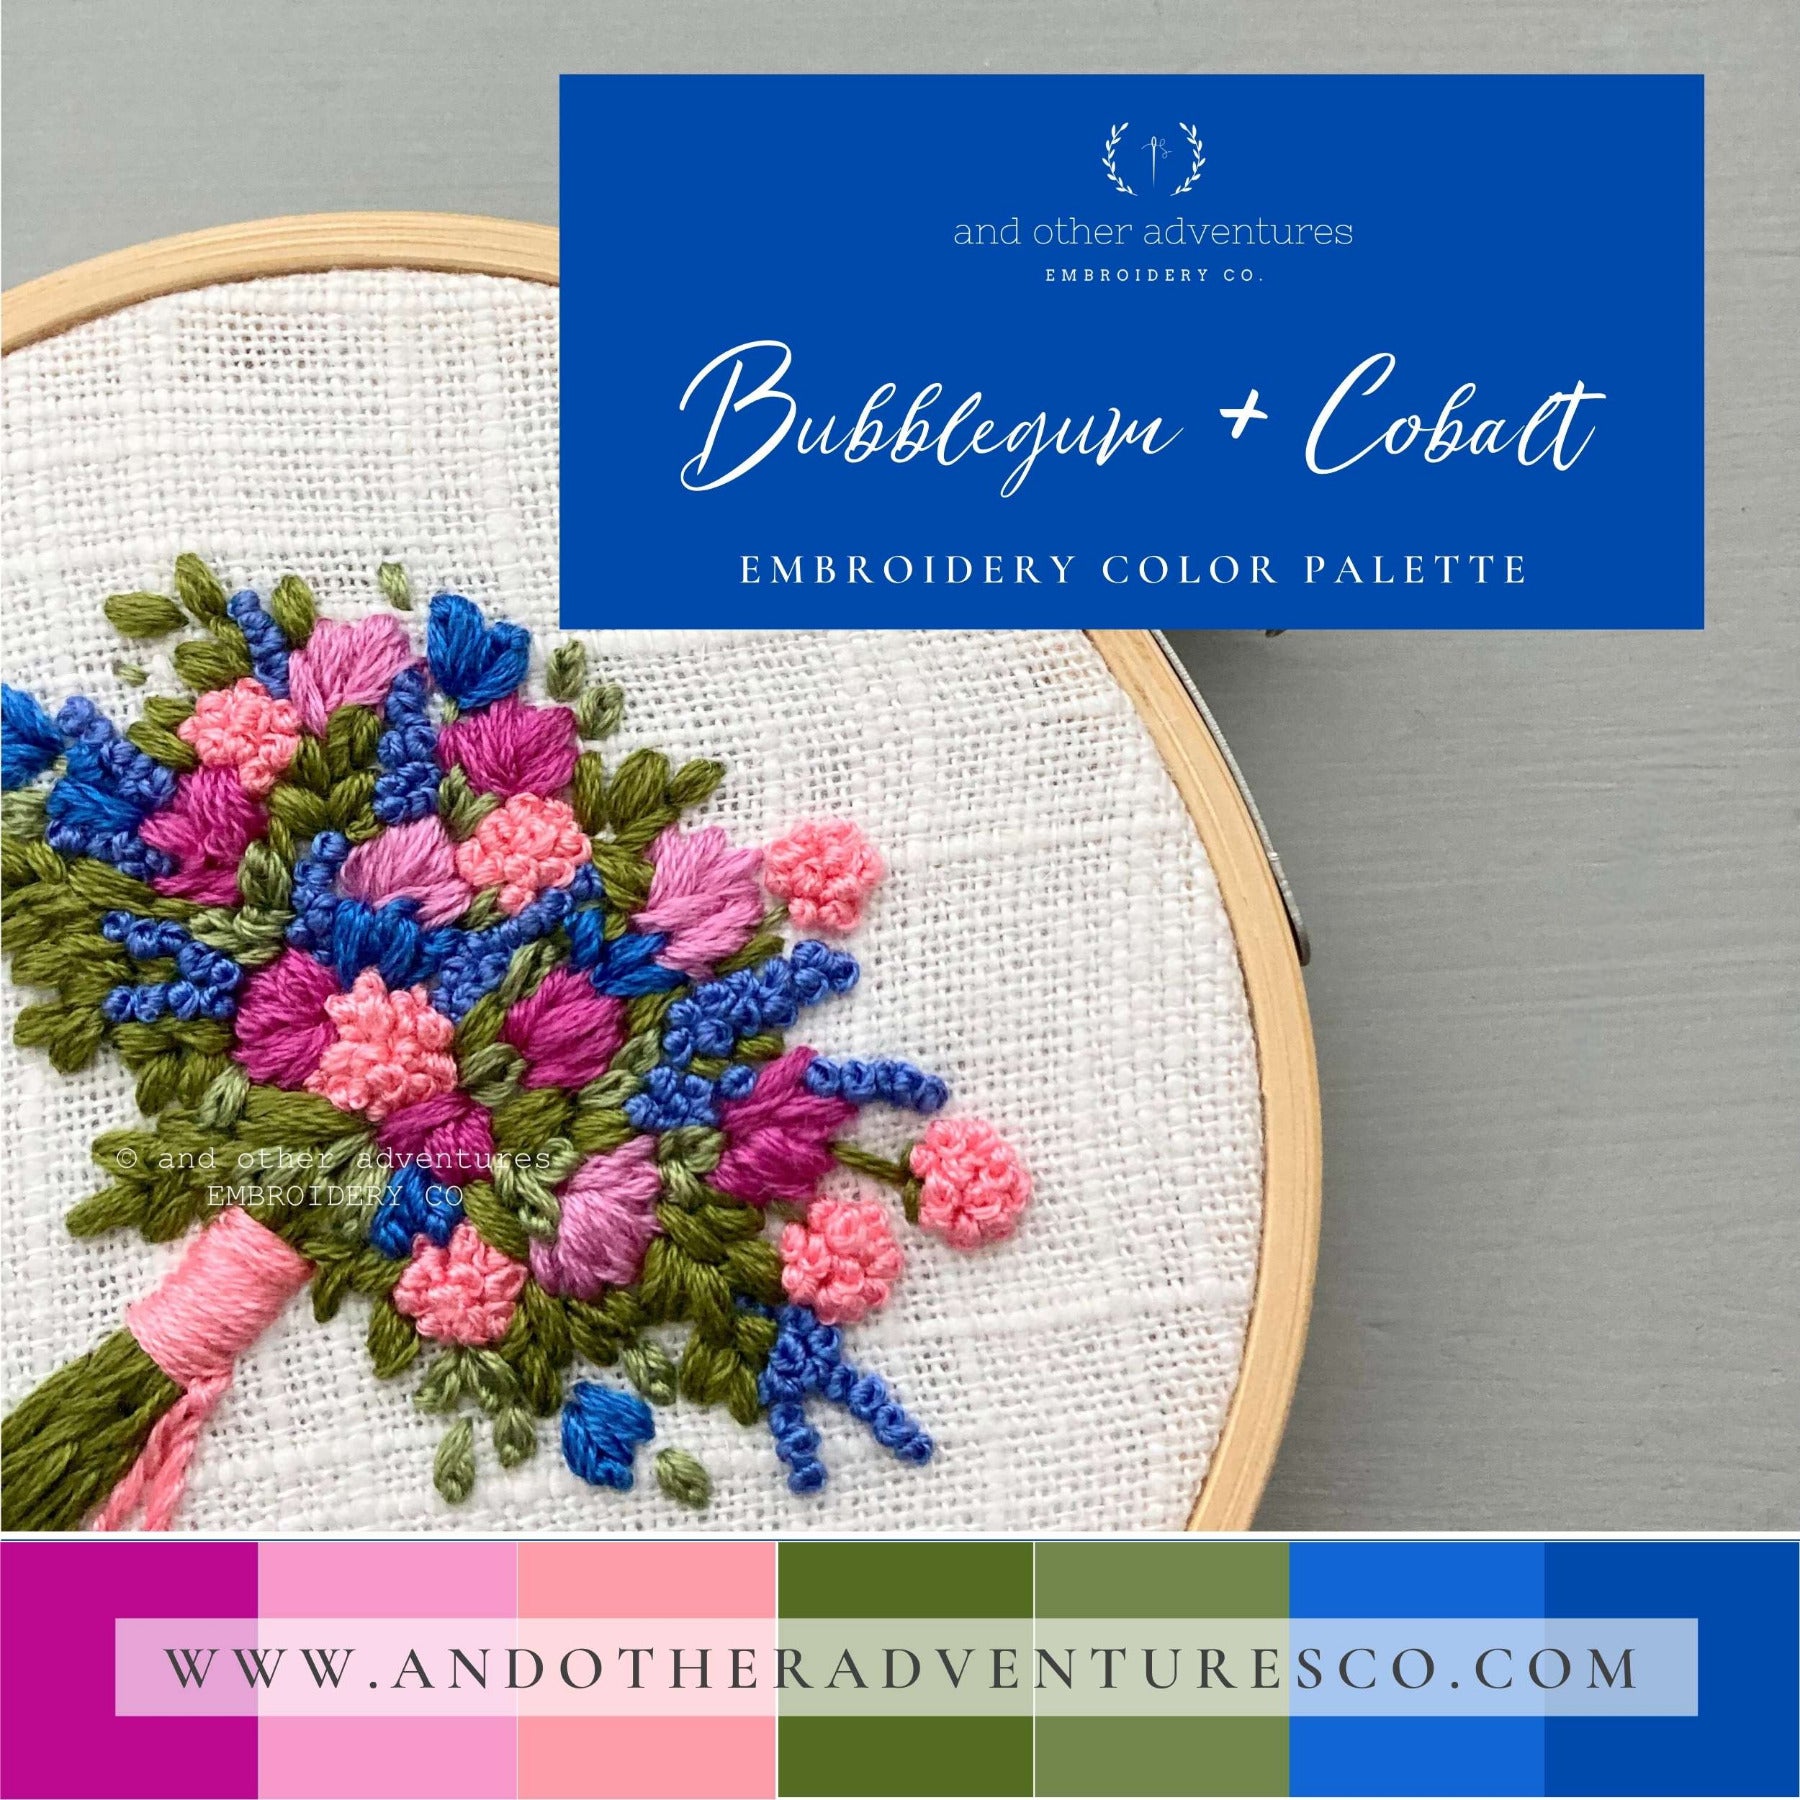 Bubblegum & Cobalt Embroidery Floss Color Palette | And Other Adventures Embroidery Co